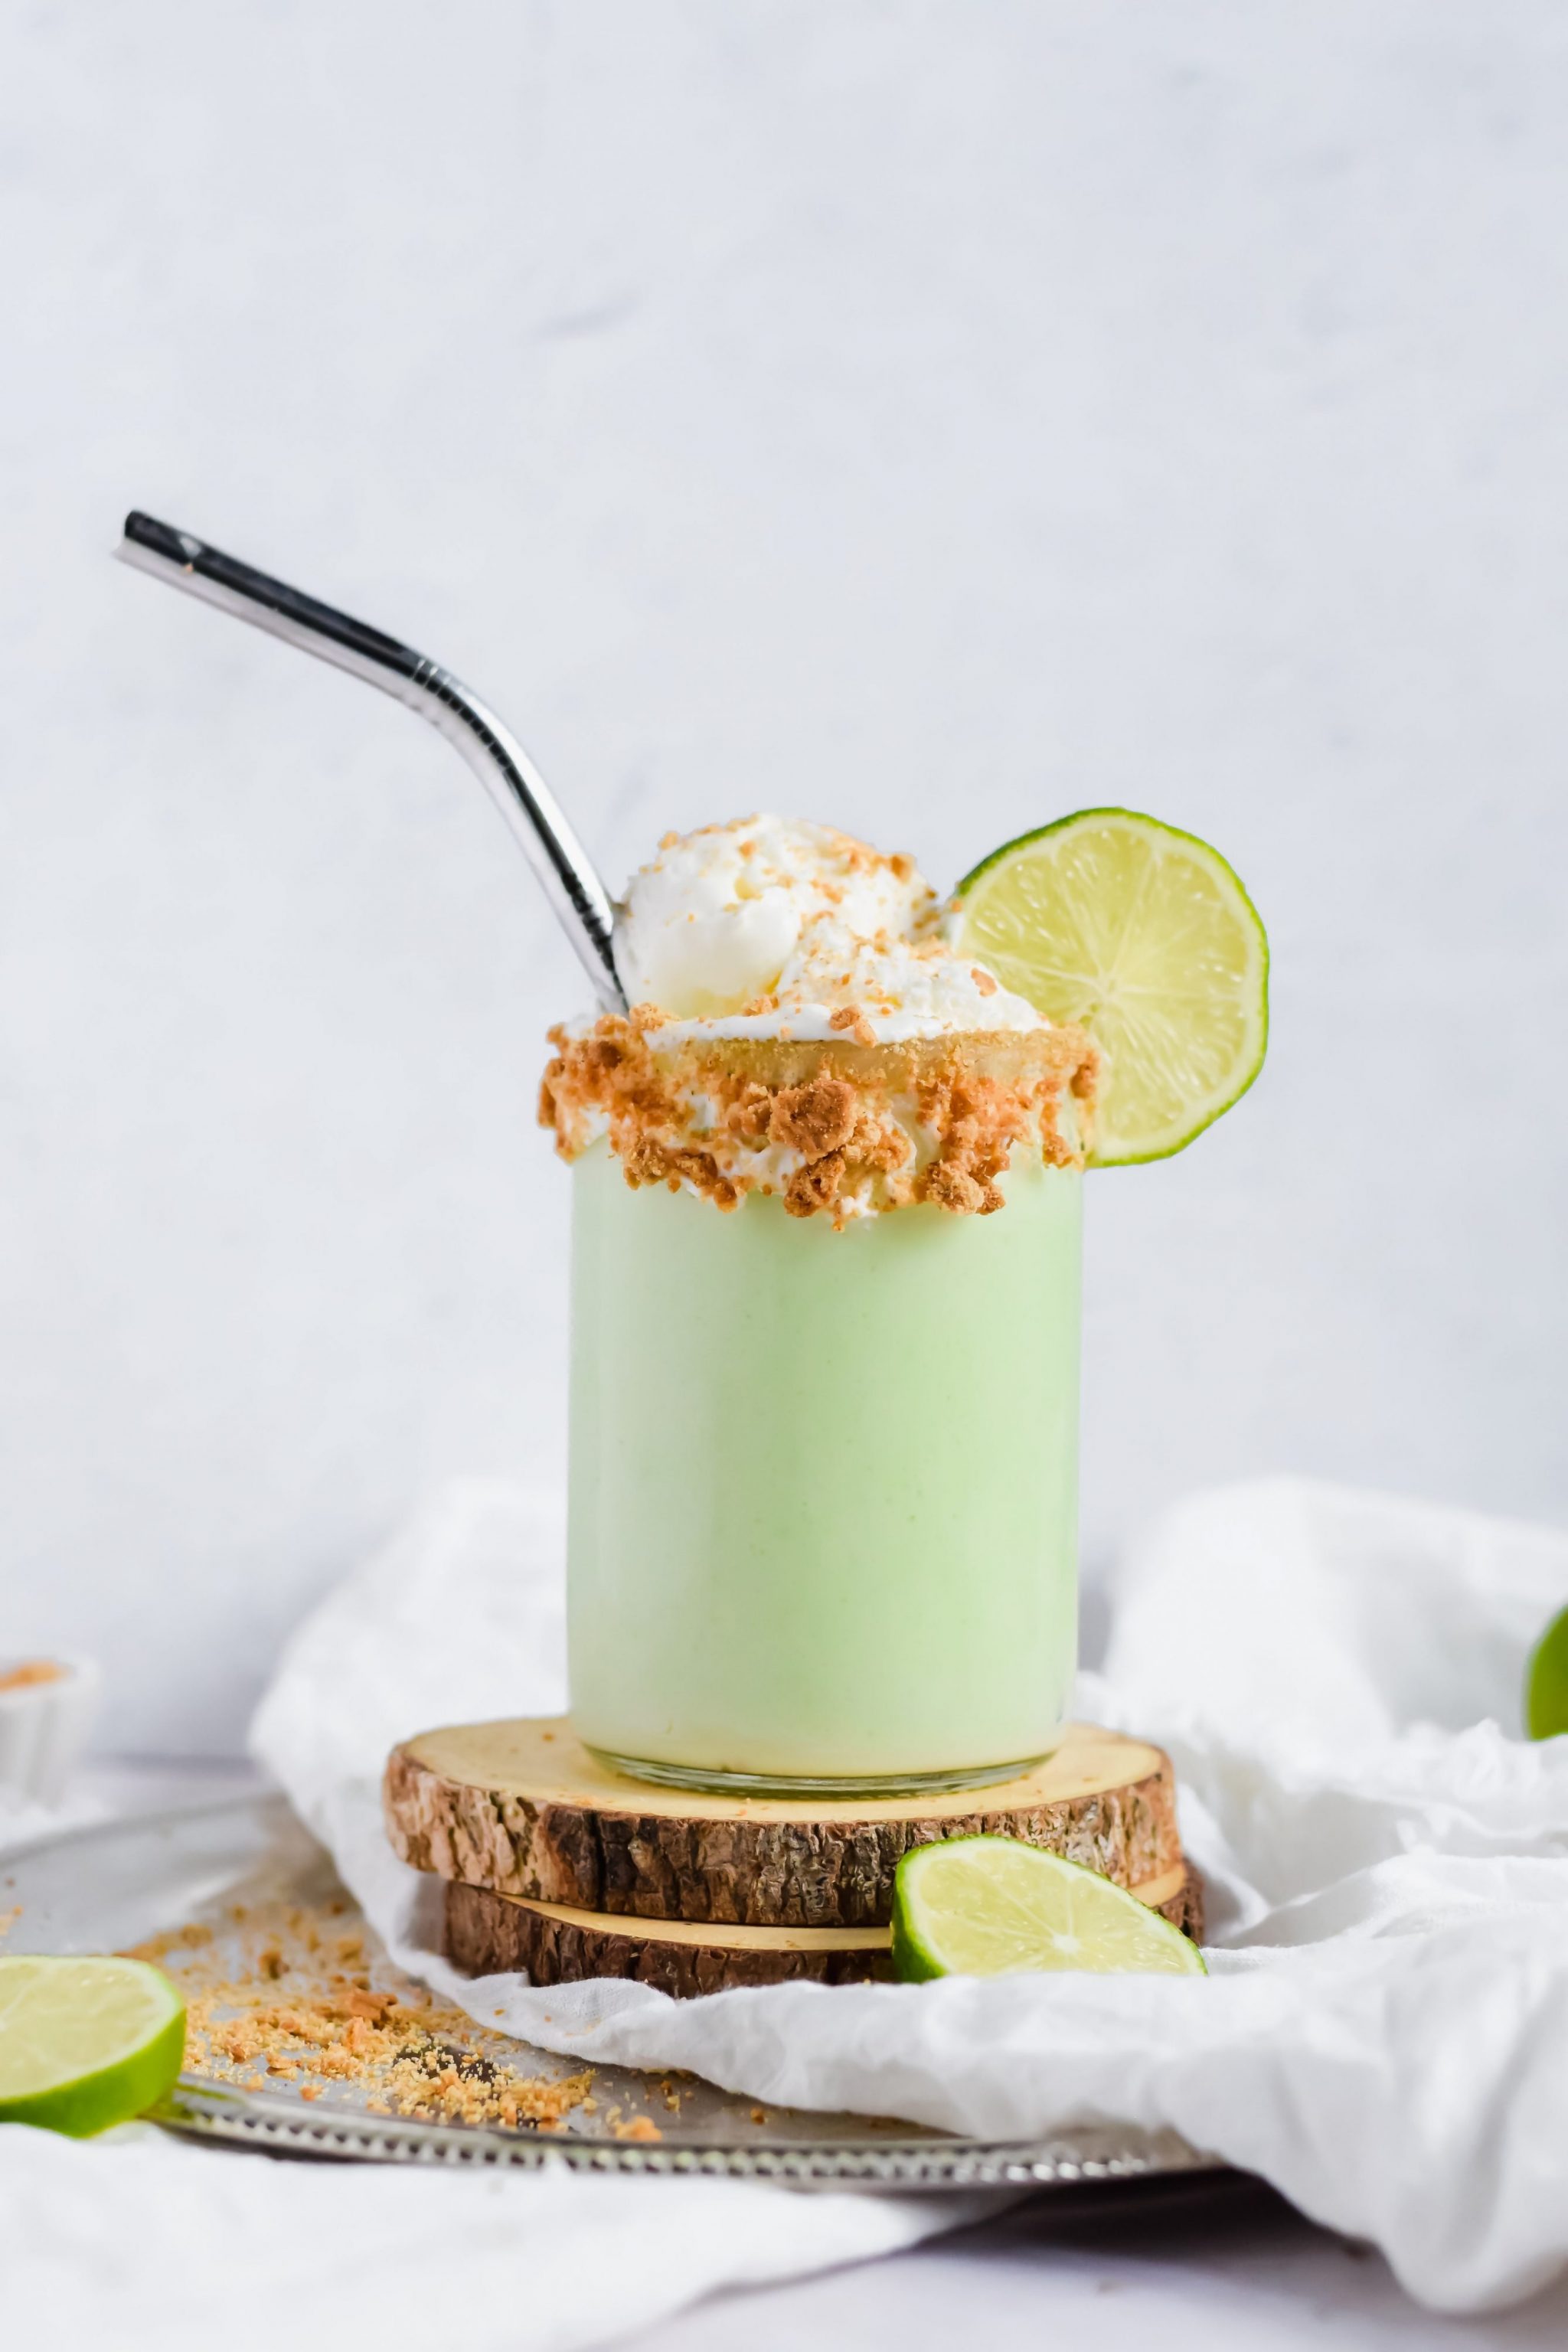 Key Lime Pie Milkshake topped with Cool Whip, crumbled graham cracker and a slice of lime with a metal straw.